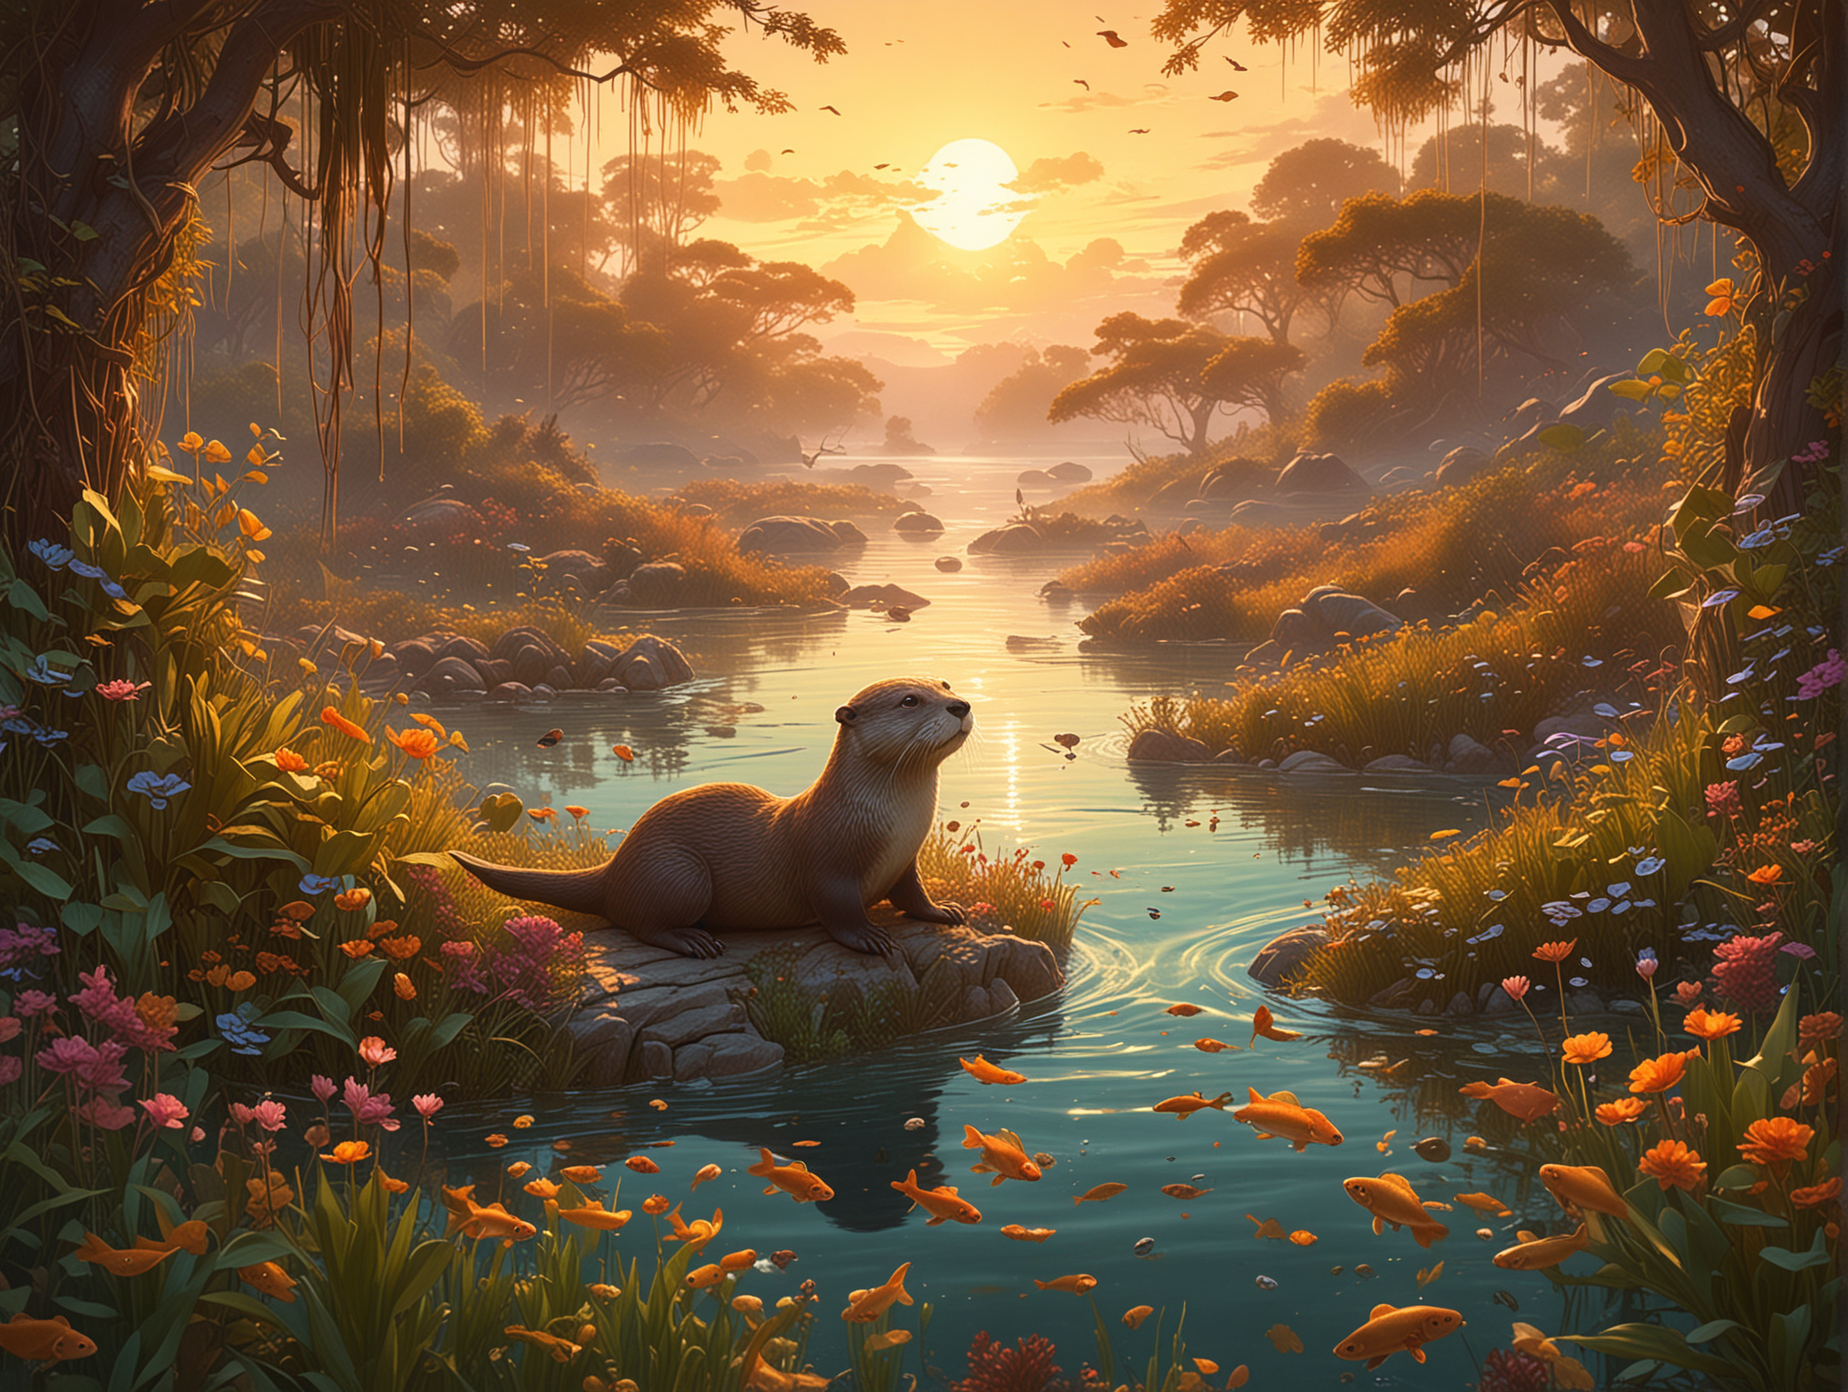 Imaginative scene transports viewers into enchanting world of otters, vibrant underwater landscape teeming with colorful fish, lush aquatic vegetation, curious otters exploring surroundings, Digital illustration, Realistic with a touch of fantasy, Highly detailed and sharp focus, warm and golden lighting, with sun setting on horizon, casting soft glow over entire scene, by James Jean and Alphonse Mucha, Artstation